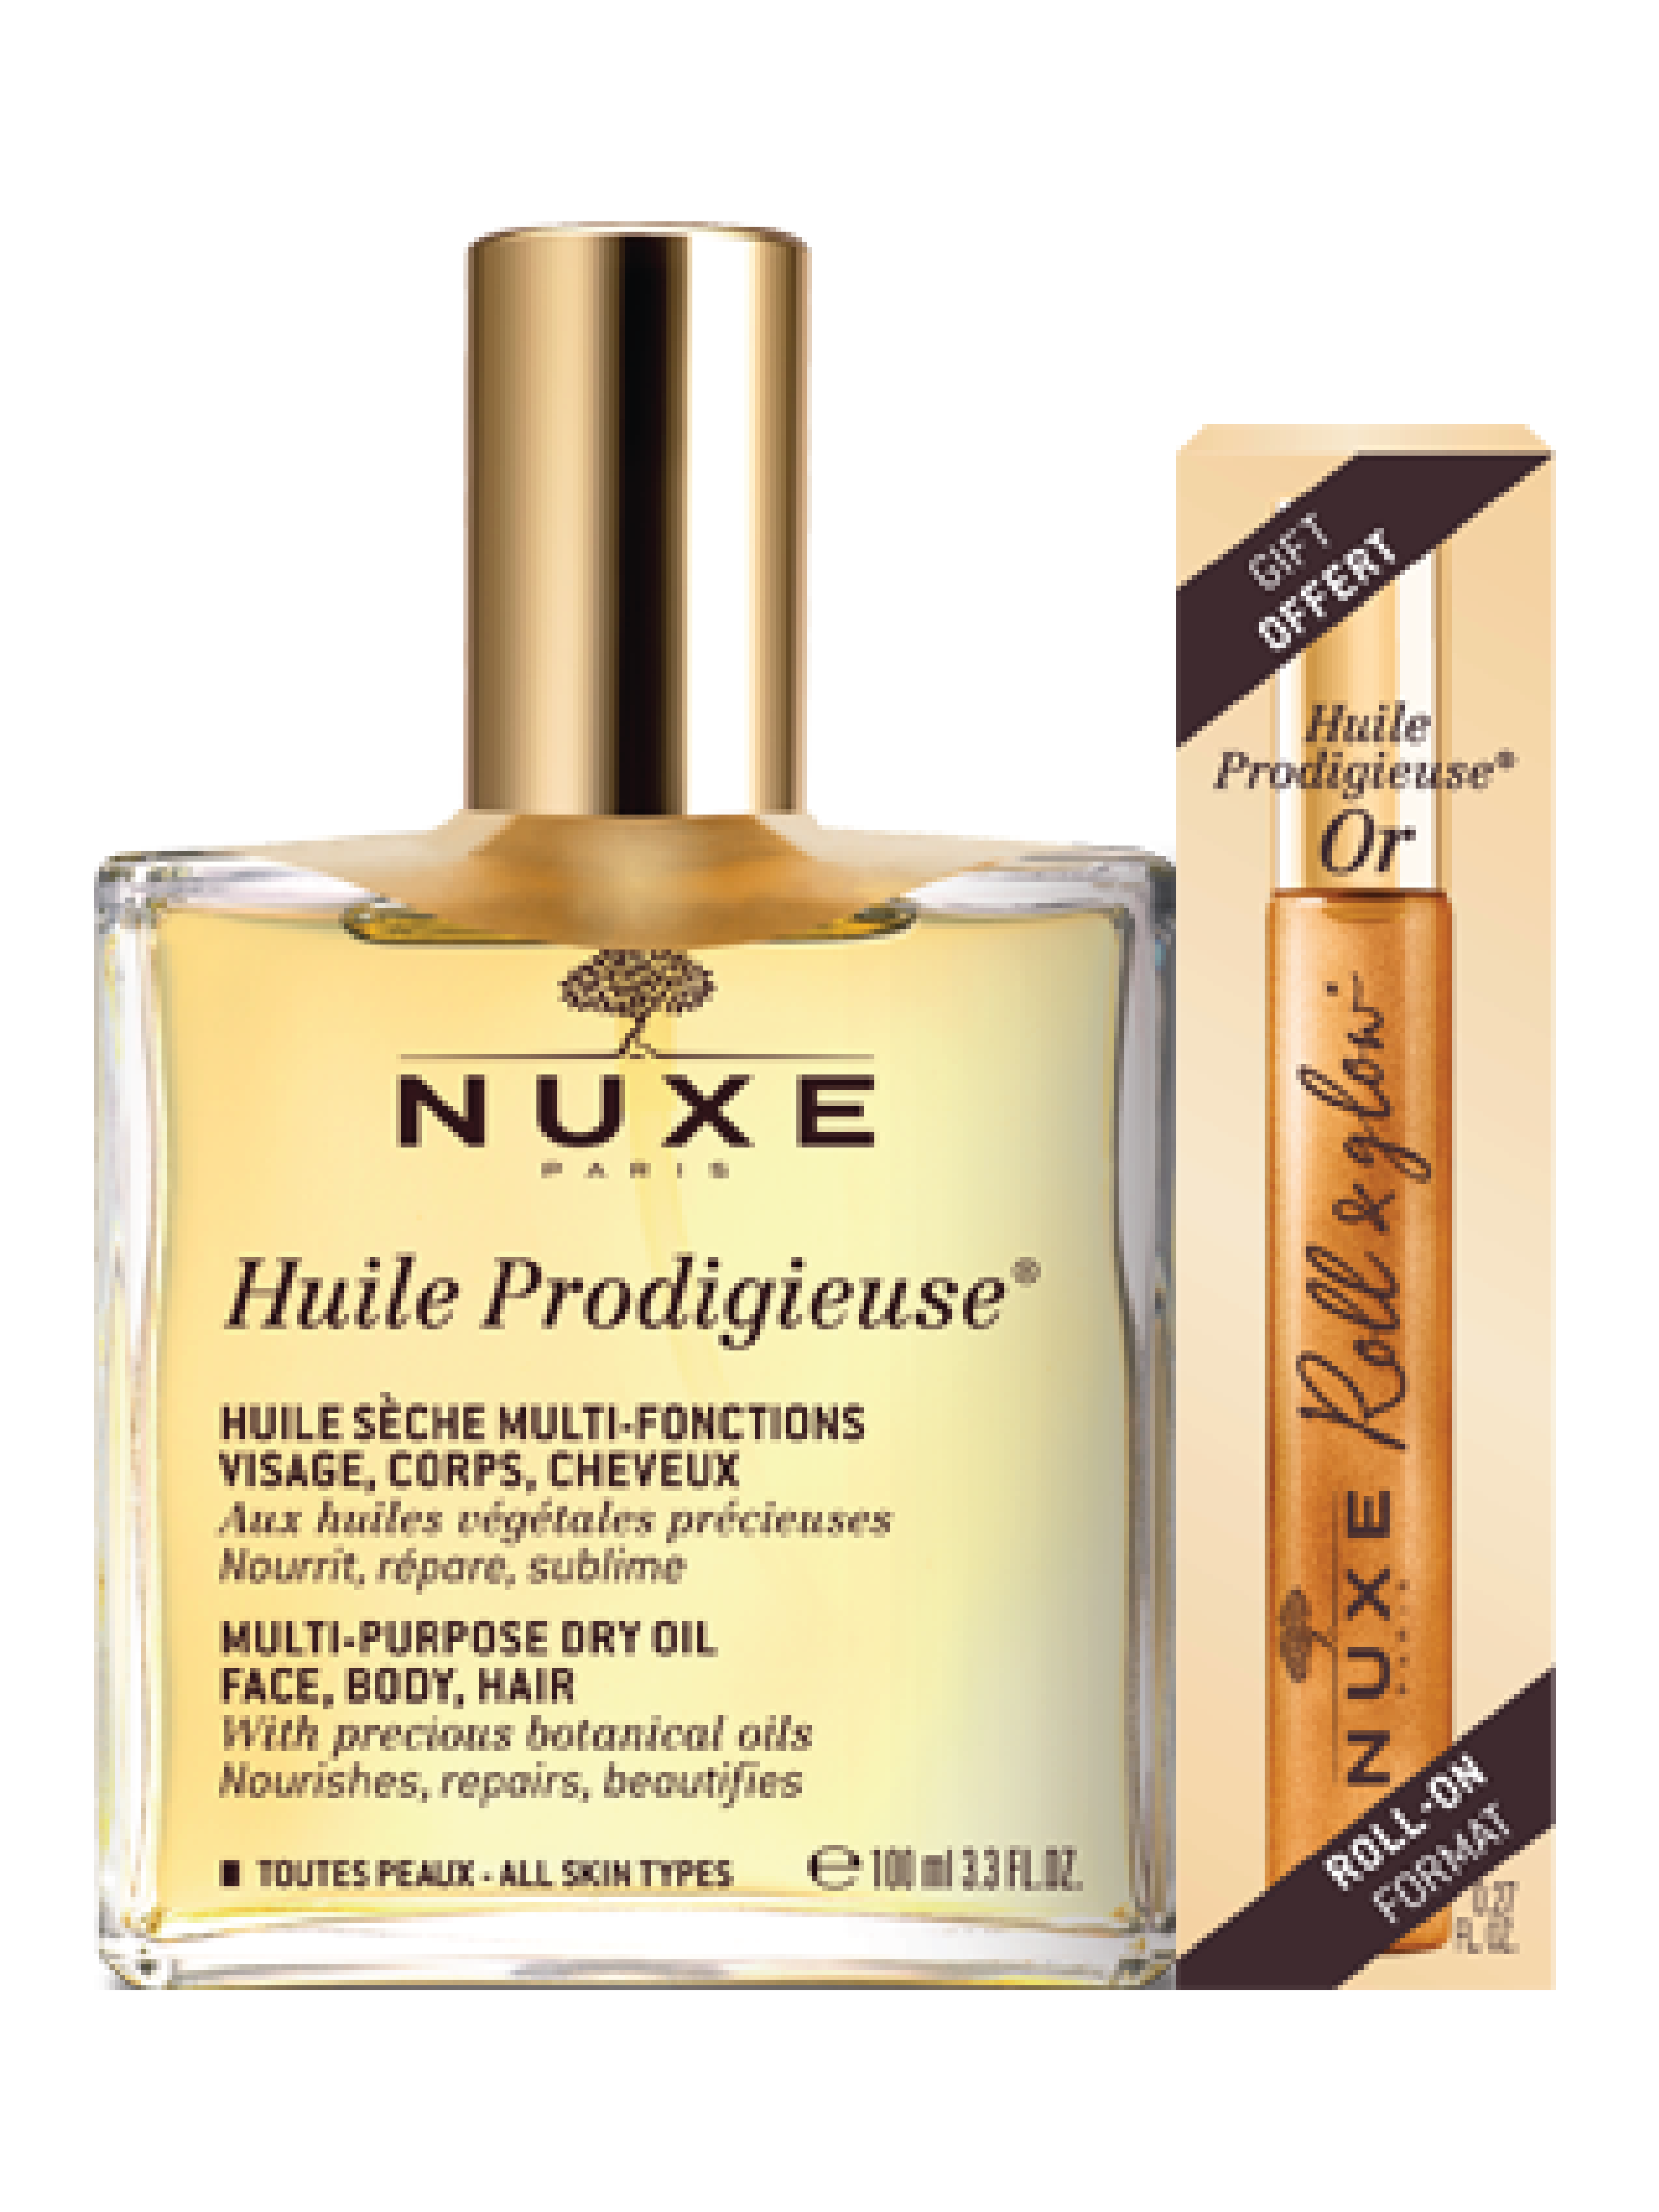 NUXE Huile Prodigieuse® Multi-Purpose Dry Oil Spray + Roll & Glow Shimmer Roll-On, 100 ml + 8 ml